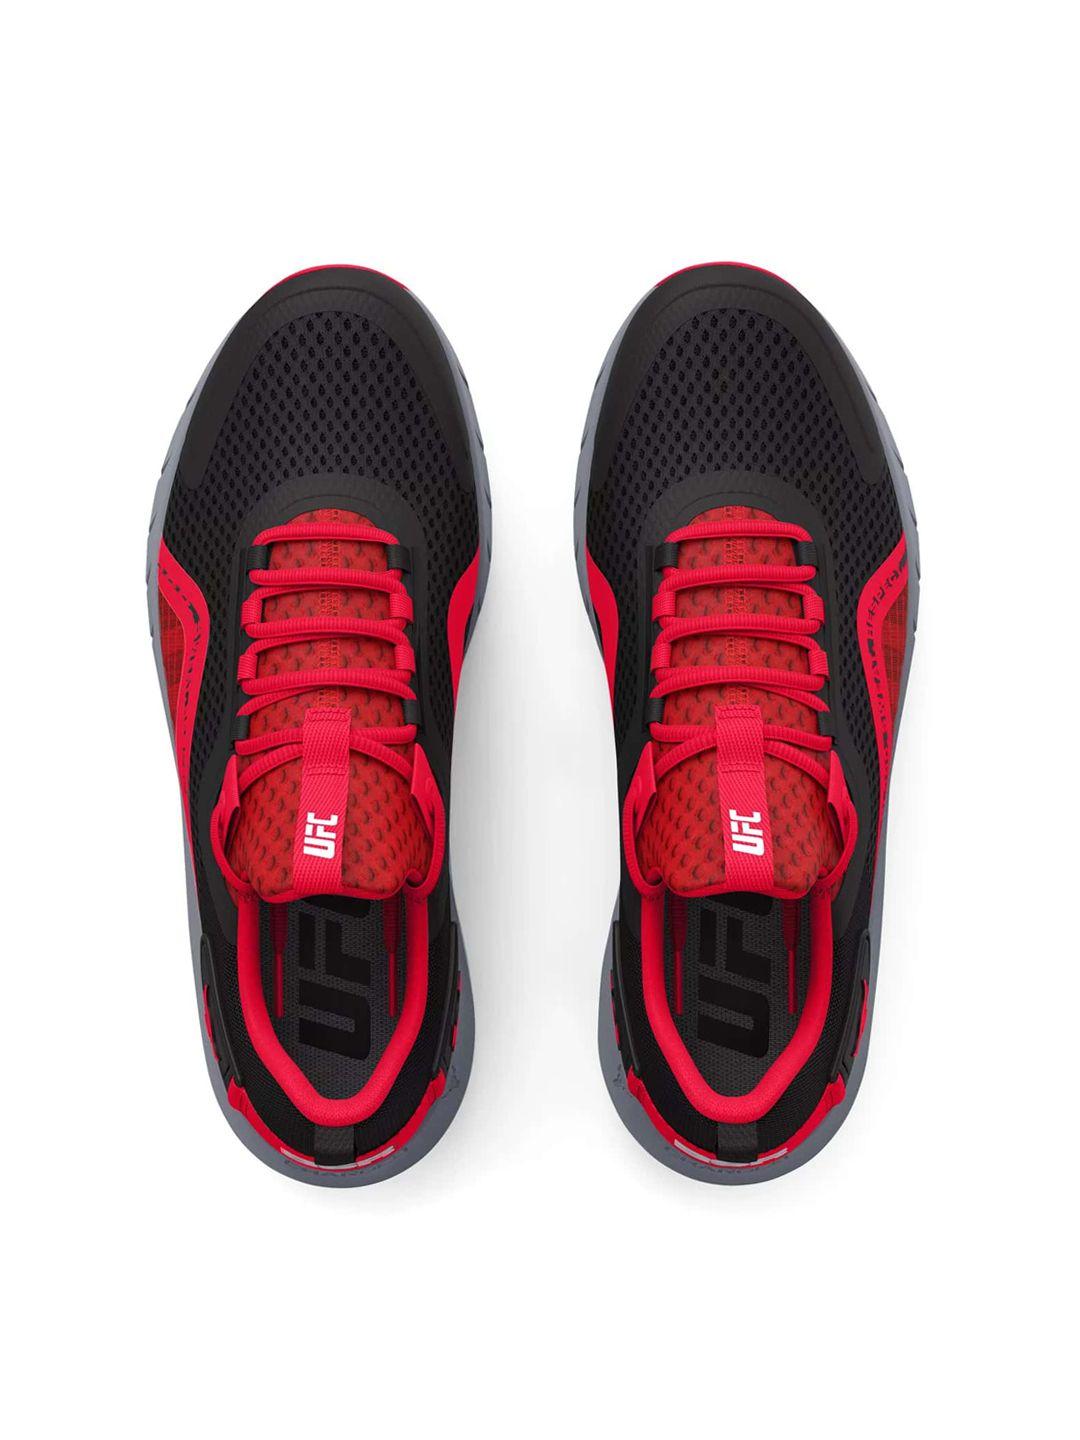 under armour men textured project rock bsr 3 training or gym shoes